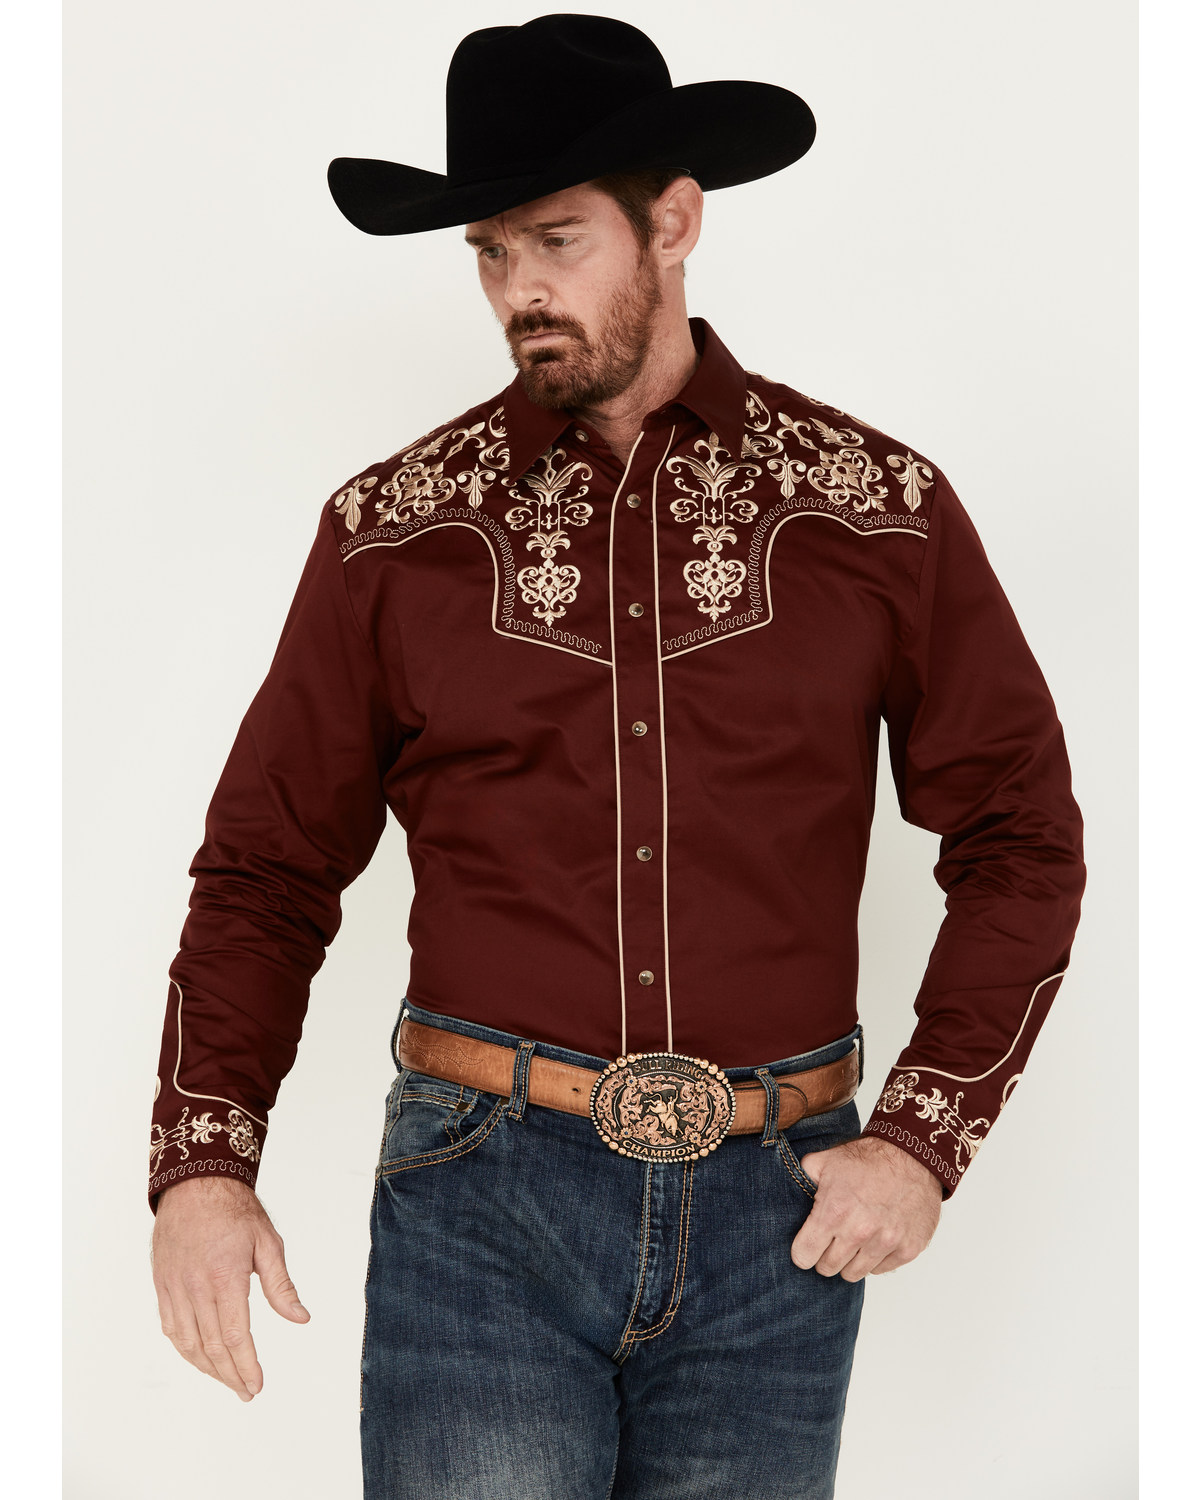 Rodeo Clothing Men's Embroidered Yoke Long Sleeve Pearl Snap Western Shirt